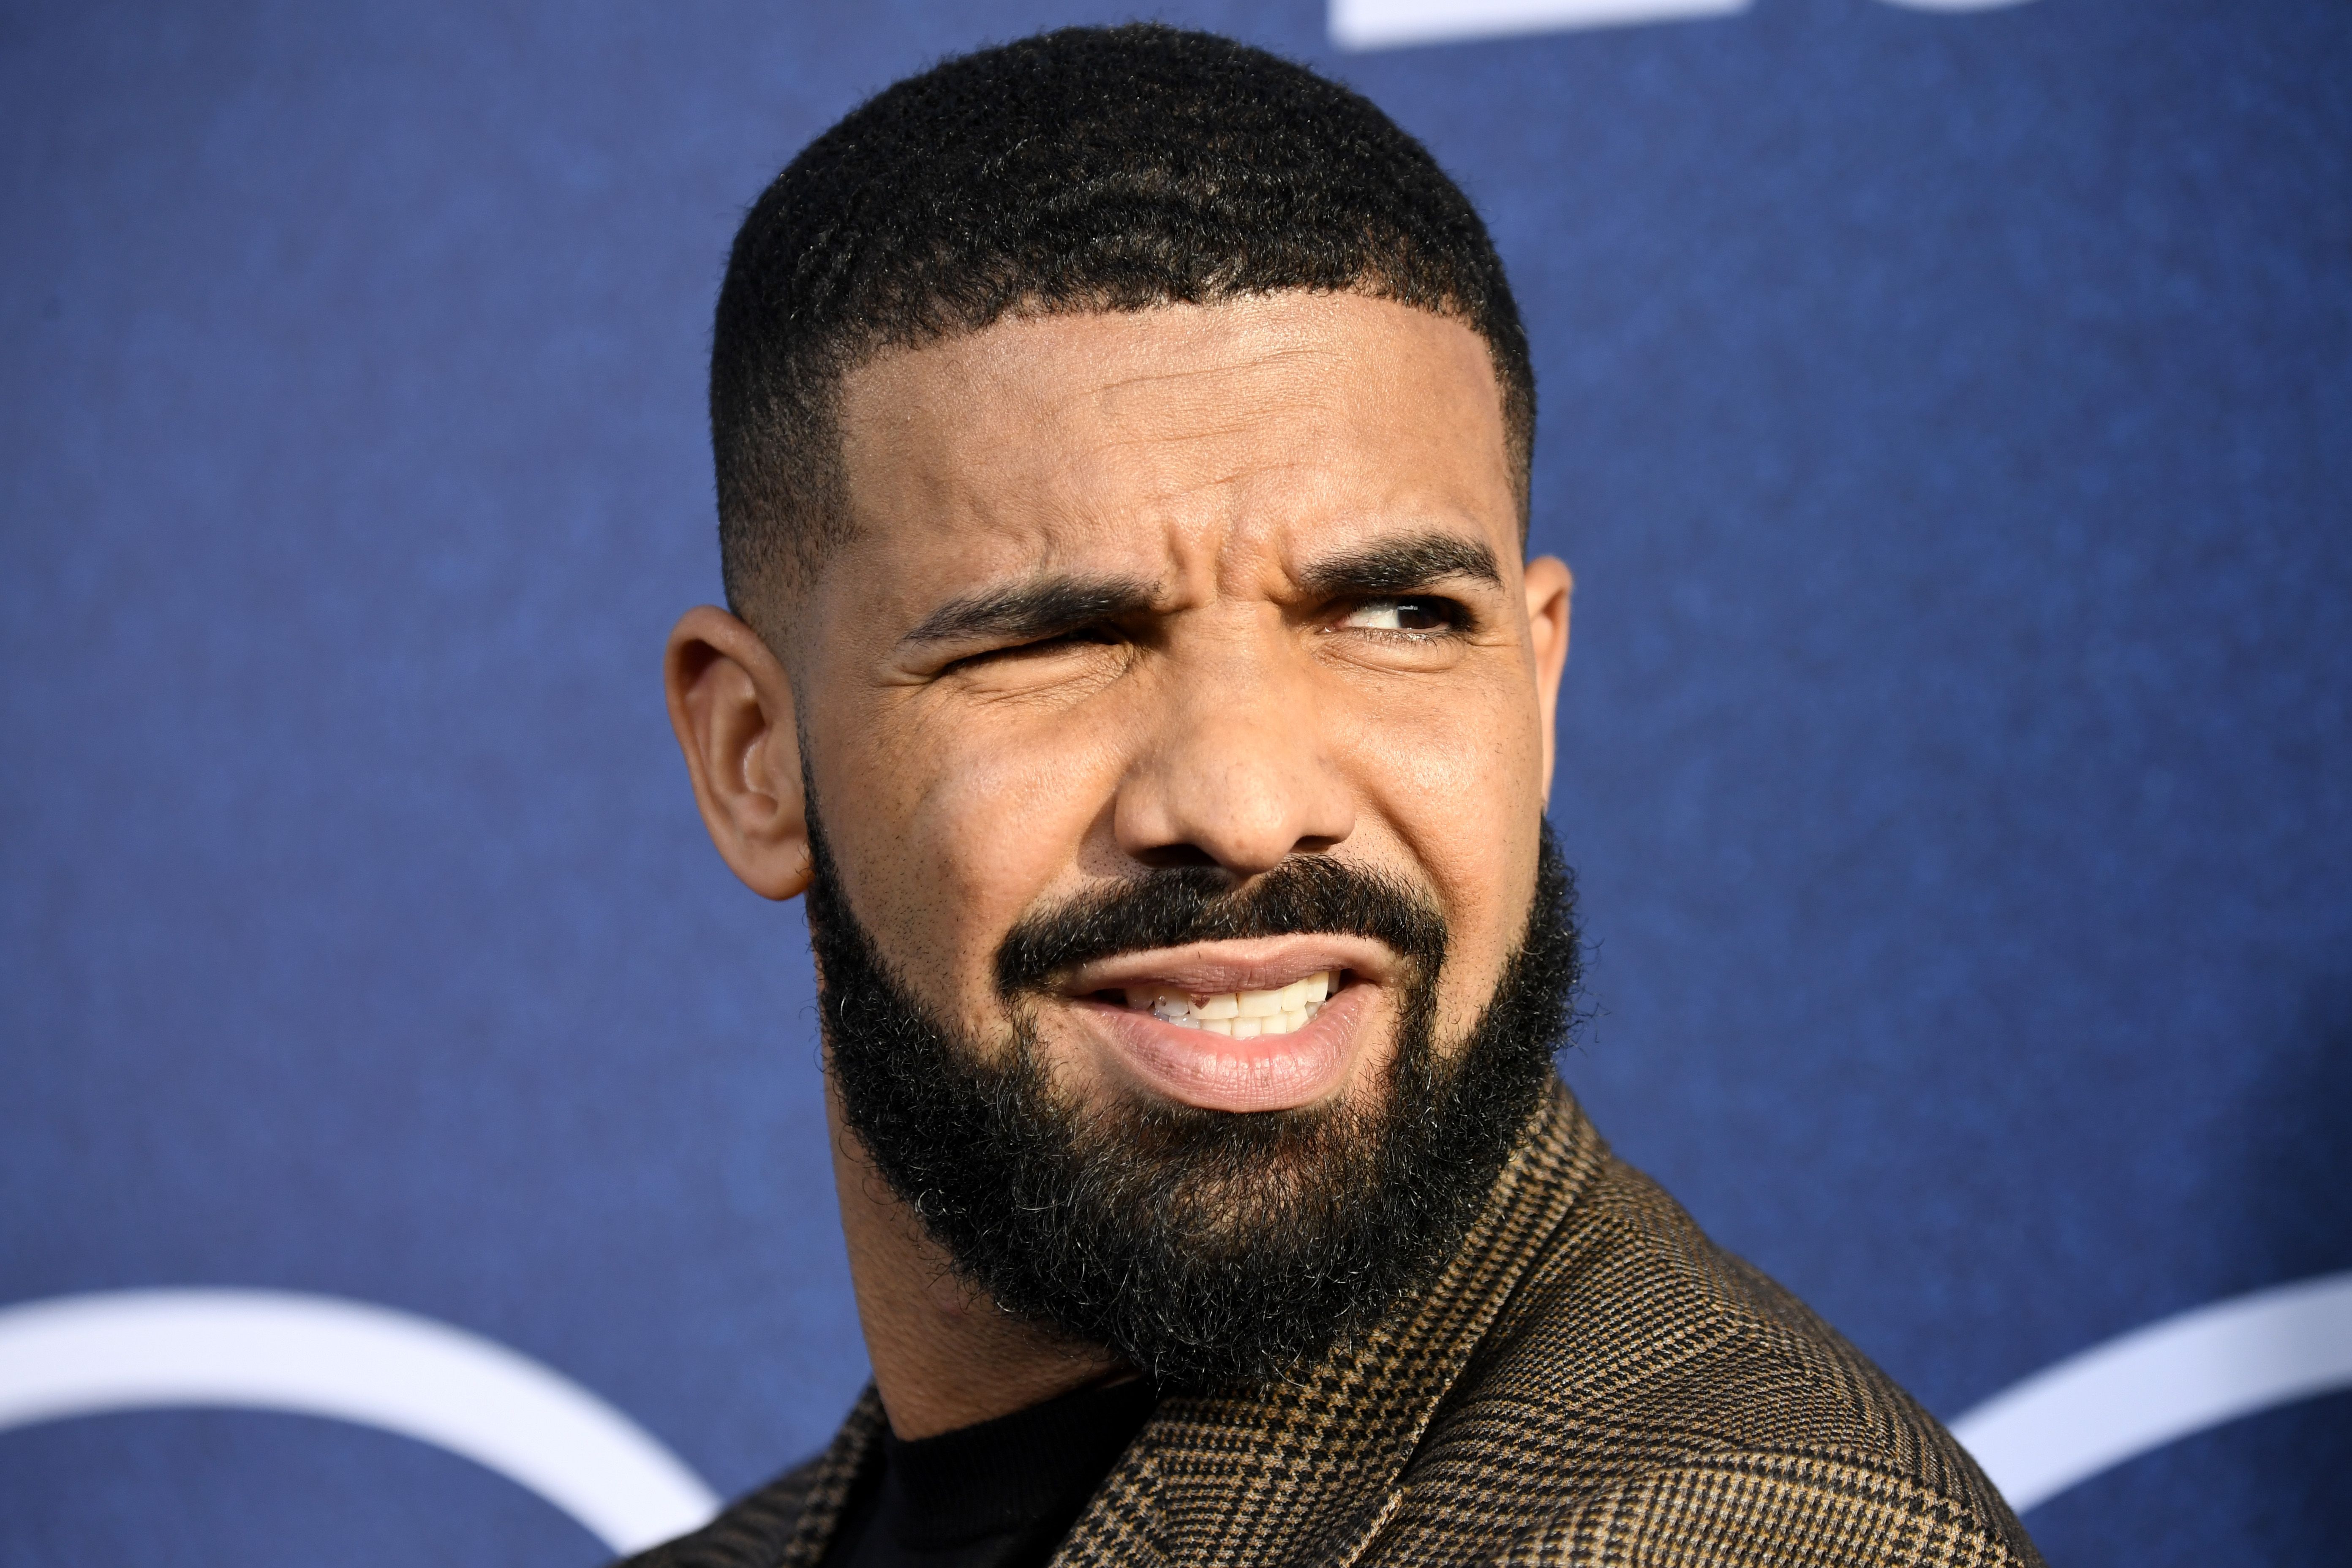 Drake Gets Tattoo of His Son's Name on the Back of His Neck - XXL